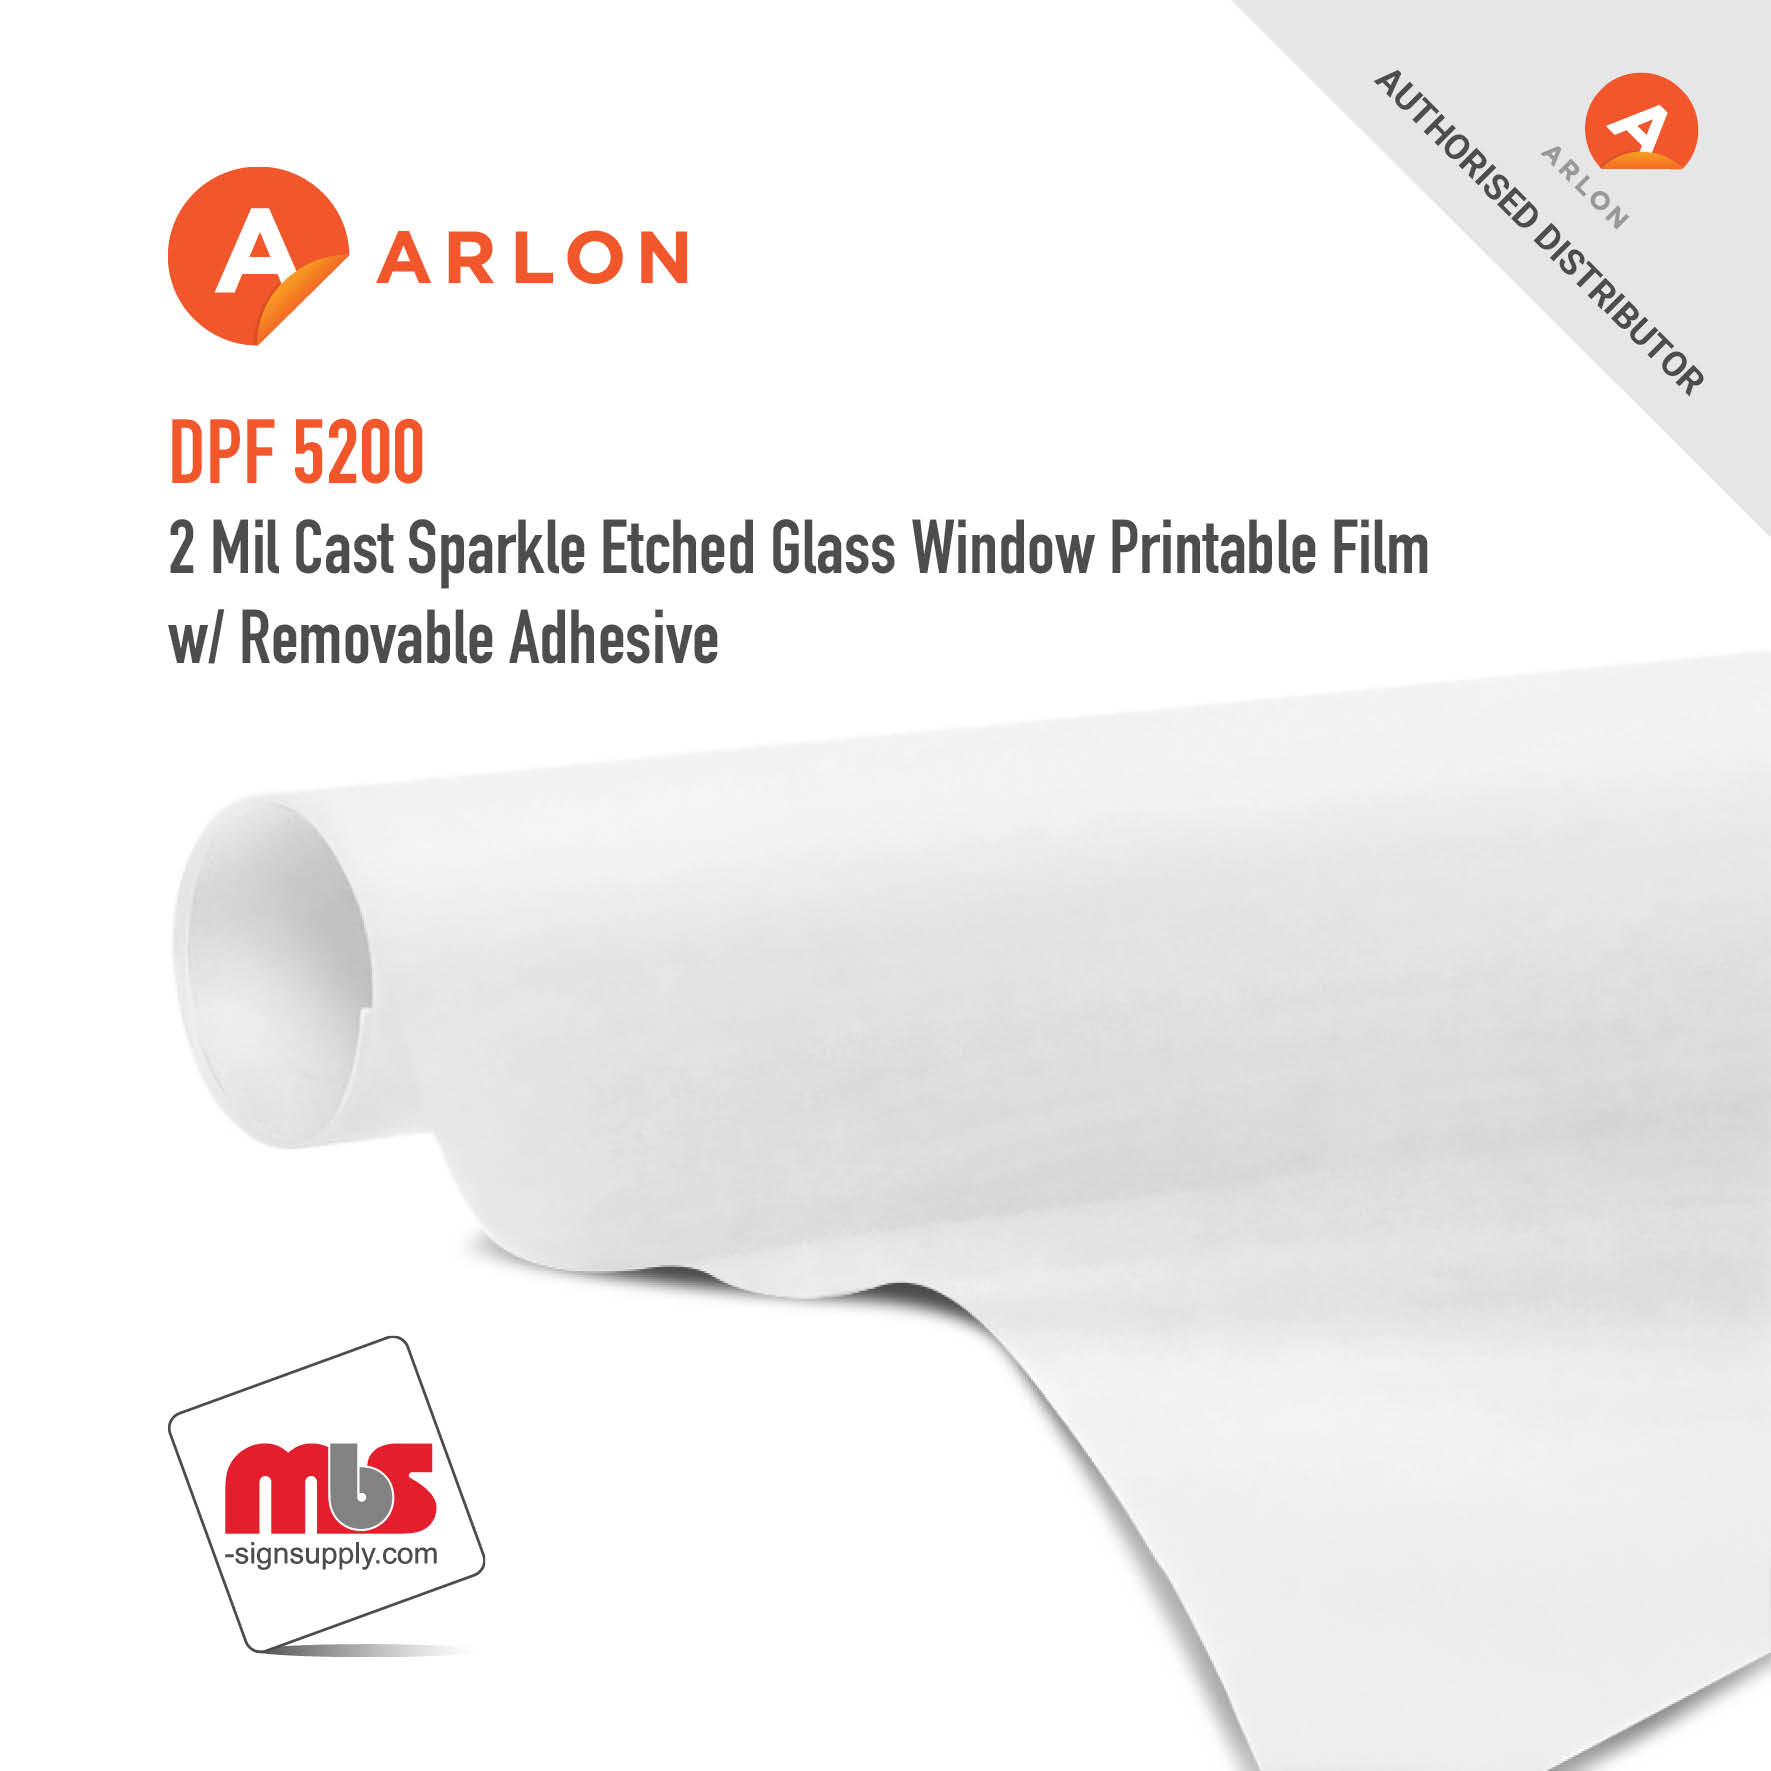 48'' x 50 Yard Roll - Arlon DPF 5200 2 Mil Cast Sparkle Etched Glass Window Printable Film w/ Removable Adhesive